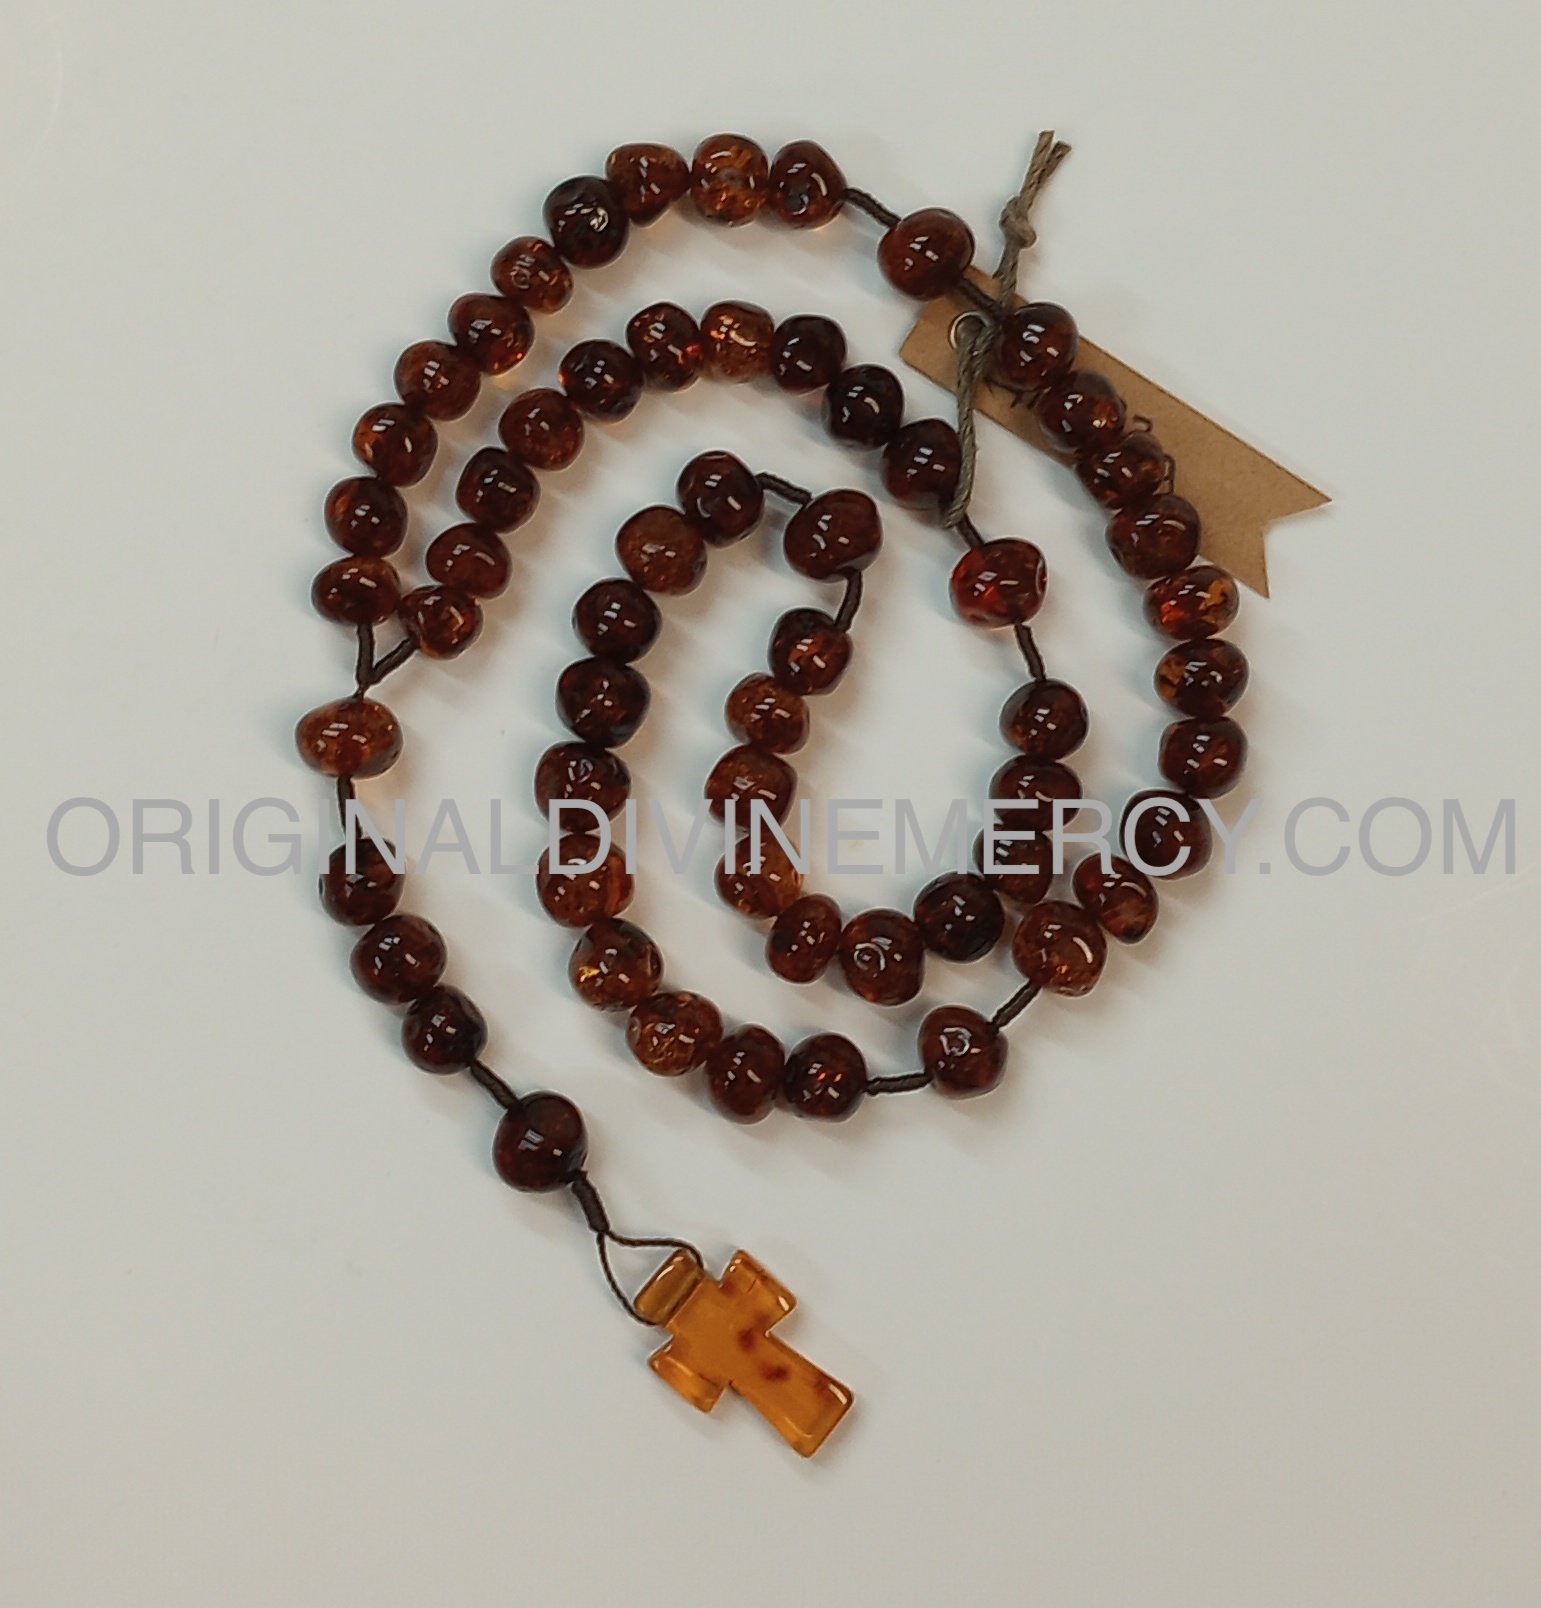 Red Amber Olive Beads Catholic Rosary With Cross Pendant – Amber